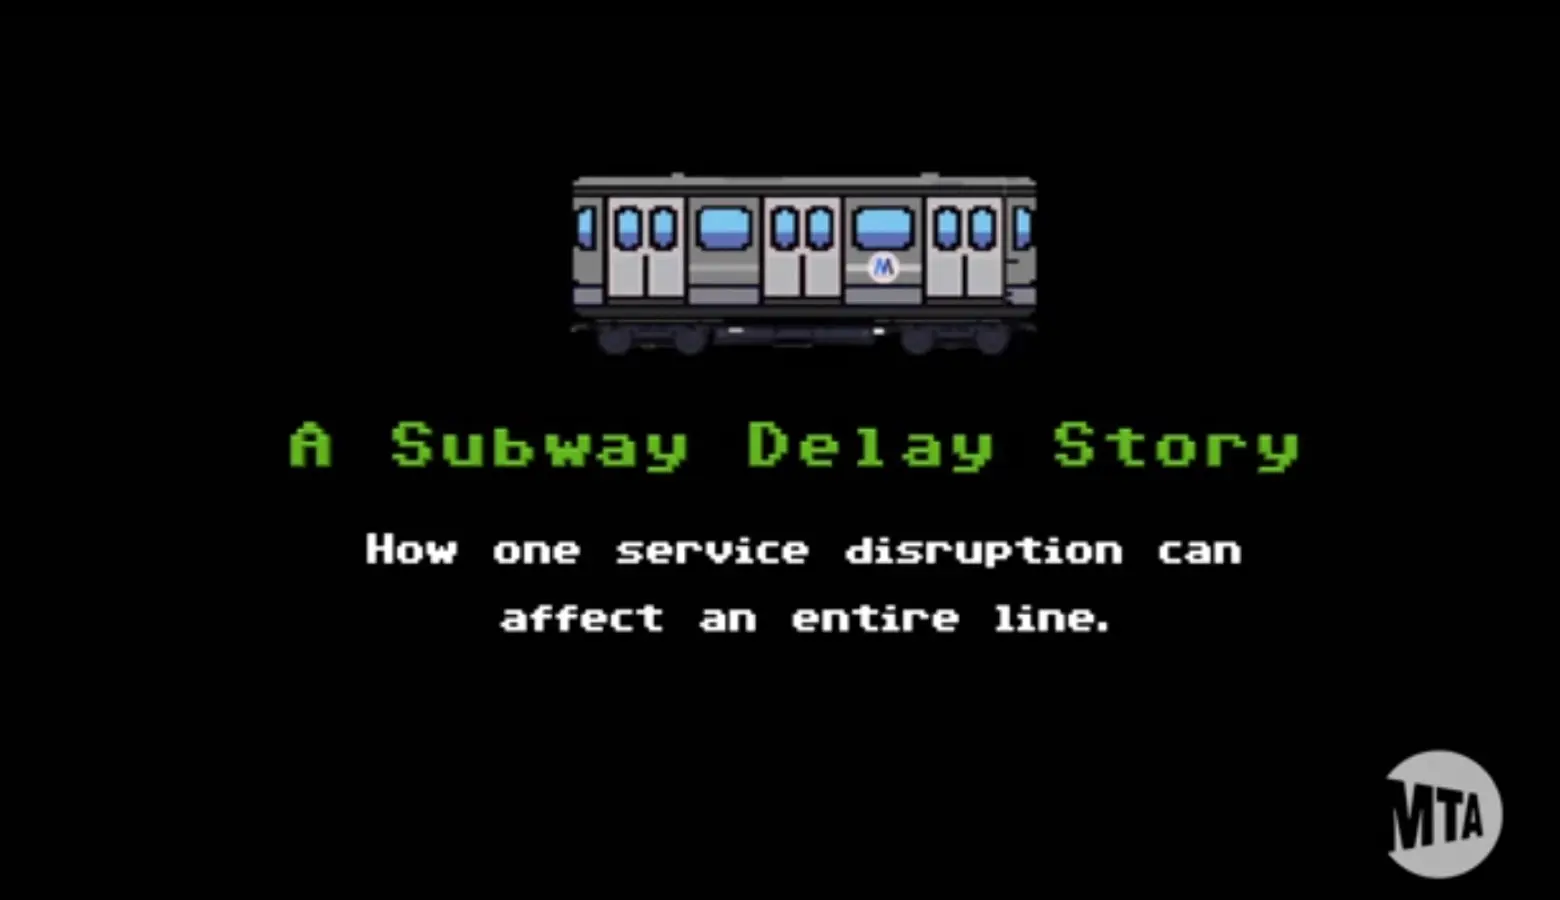 The MTA Explains Why Your Subway is Delayed with This 8-bit Video